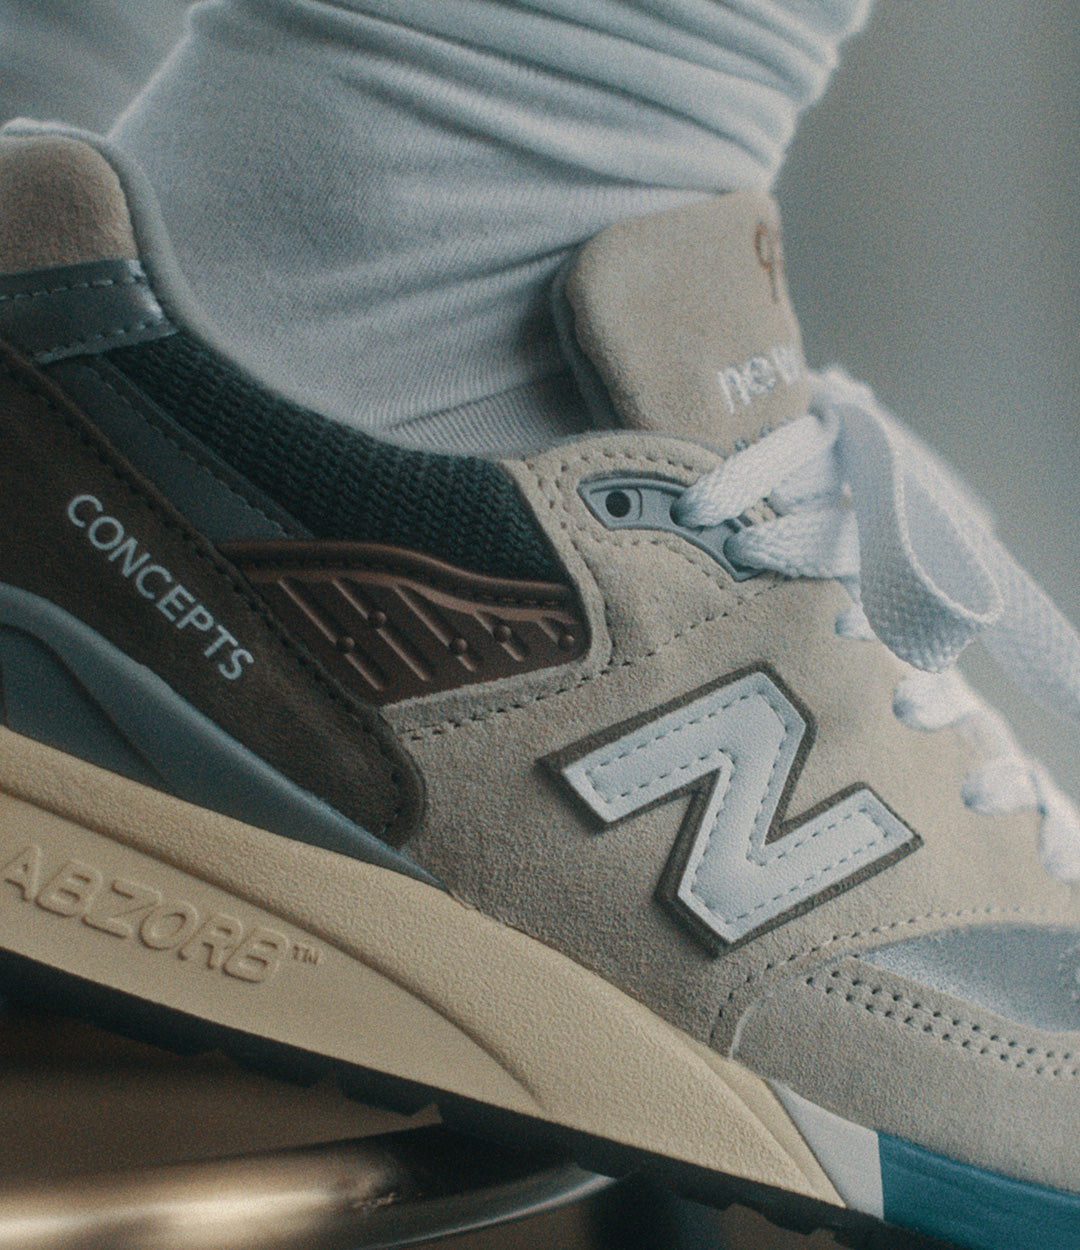 Concepts x New Balance C-Note